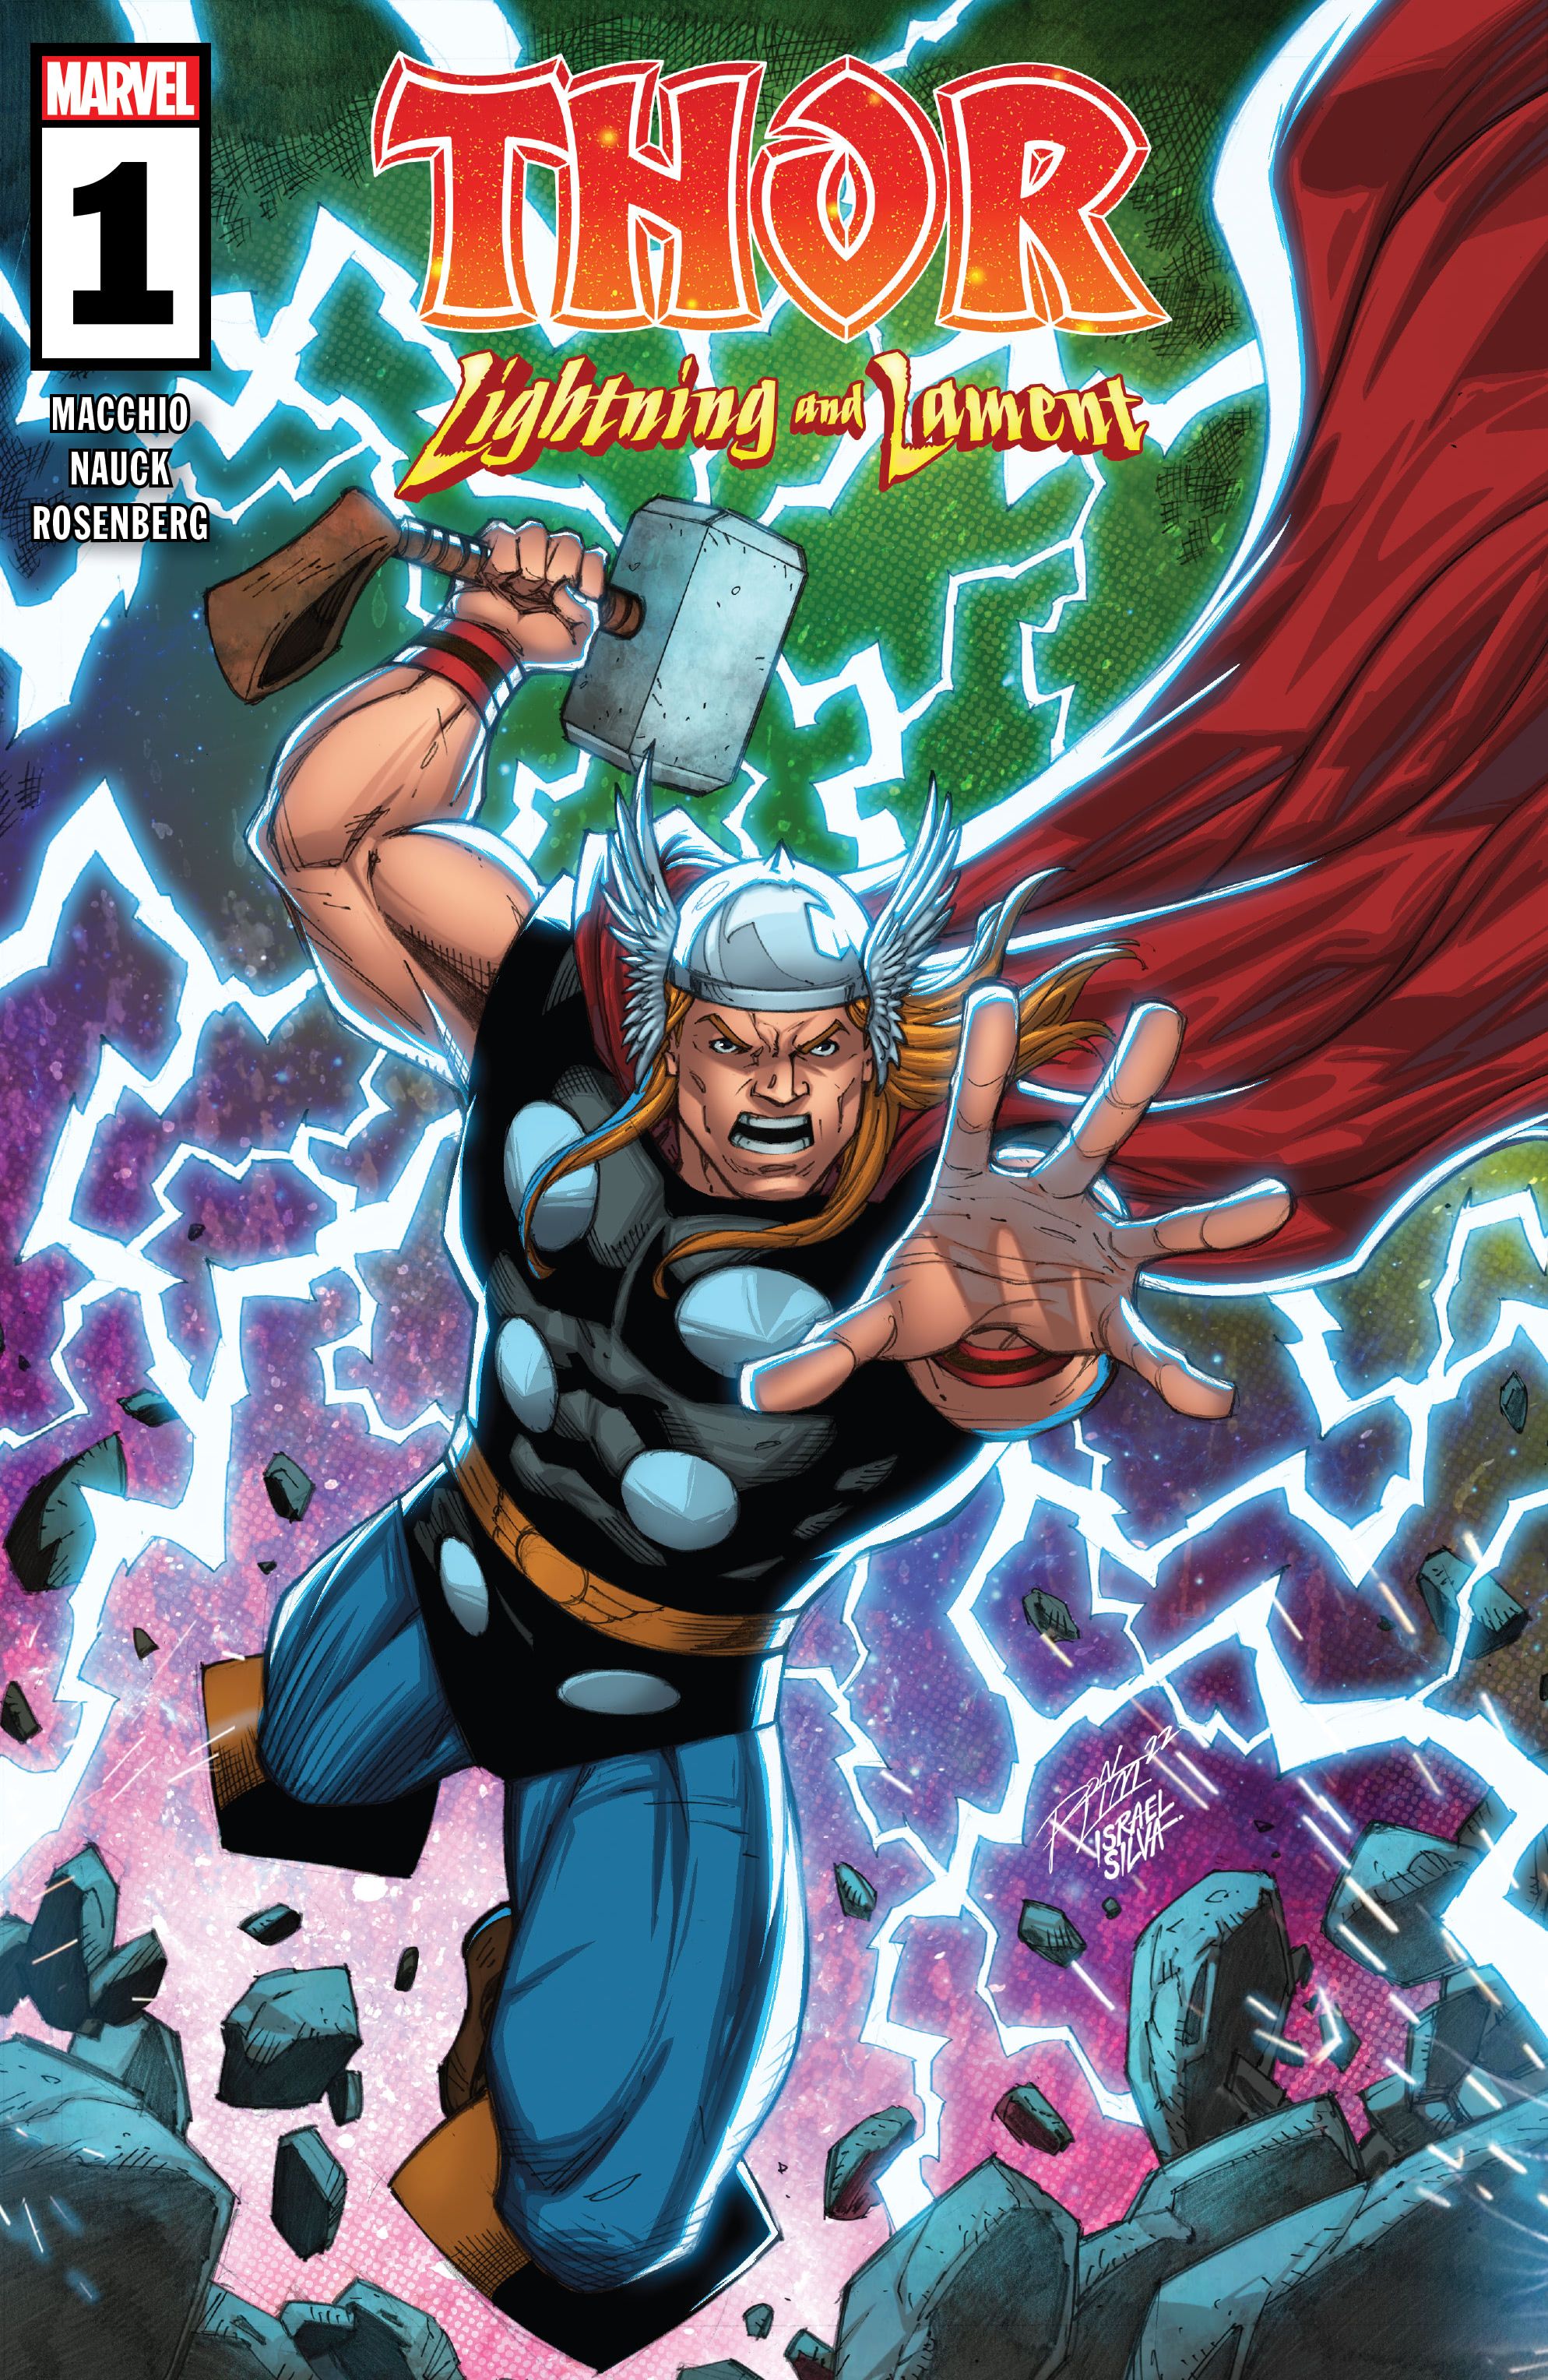 Cover of Thor Lightning and Lament #1 